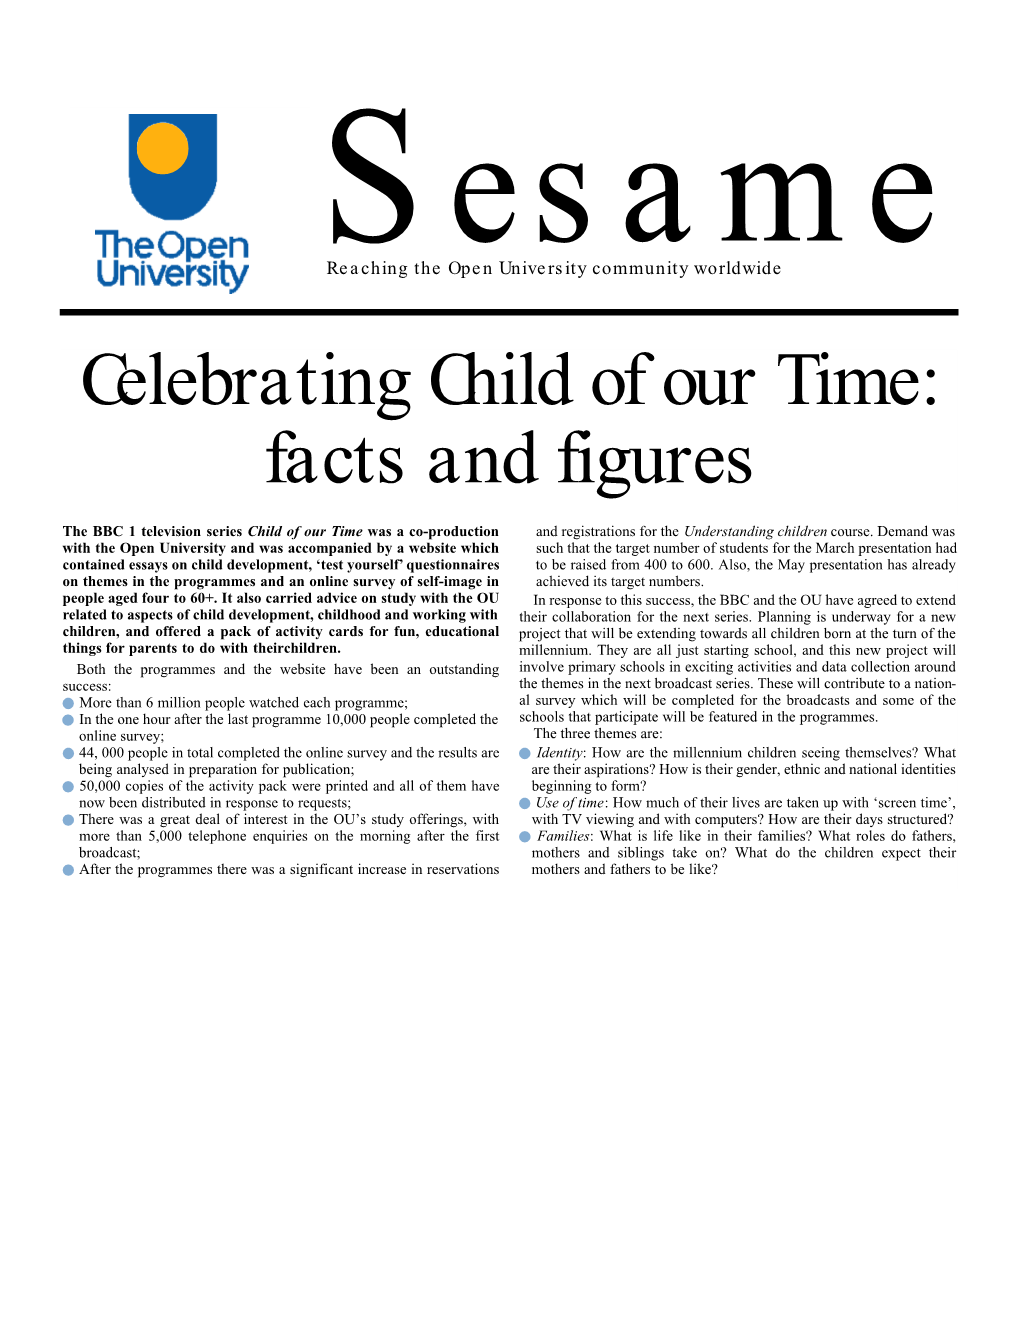 Celebrating Child of Our Time: Facts and Figures